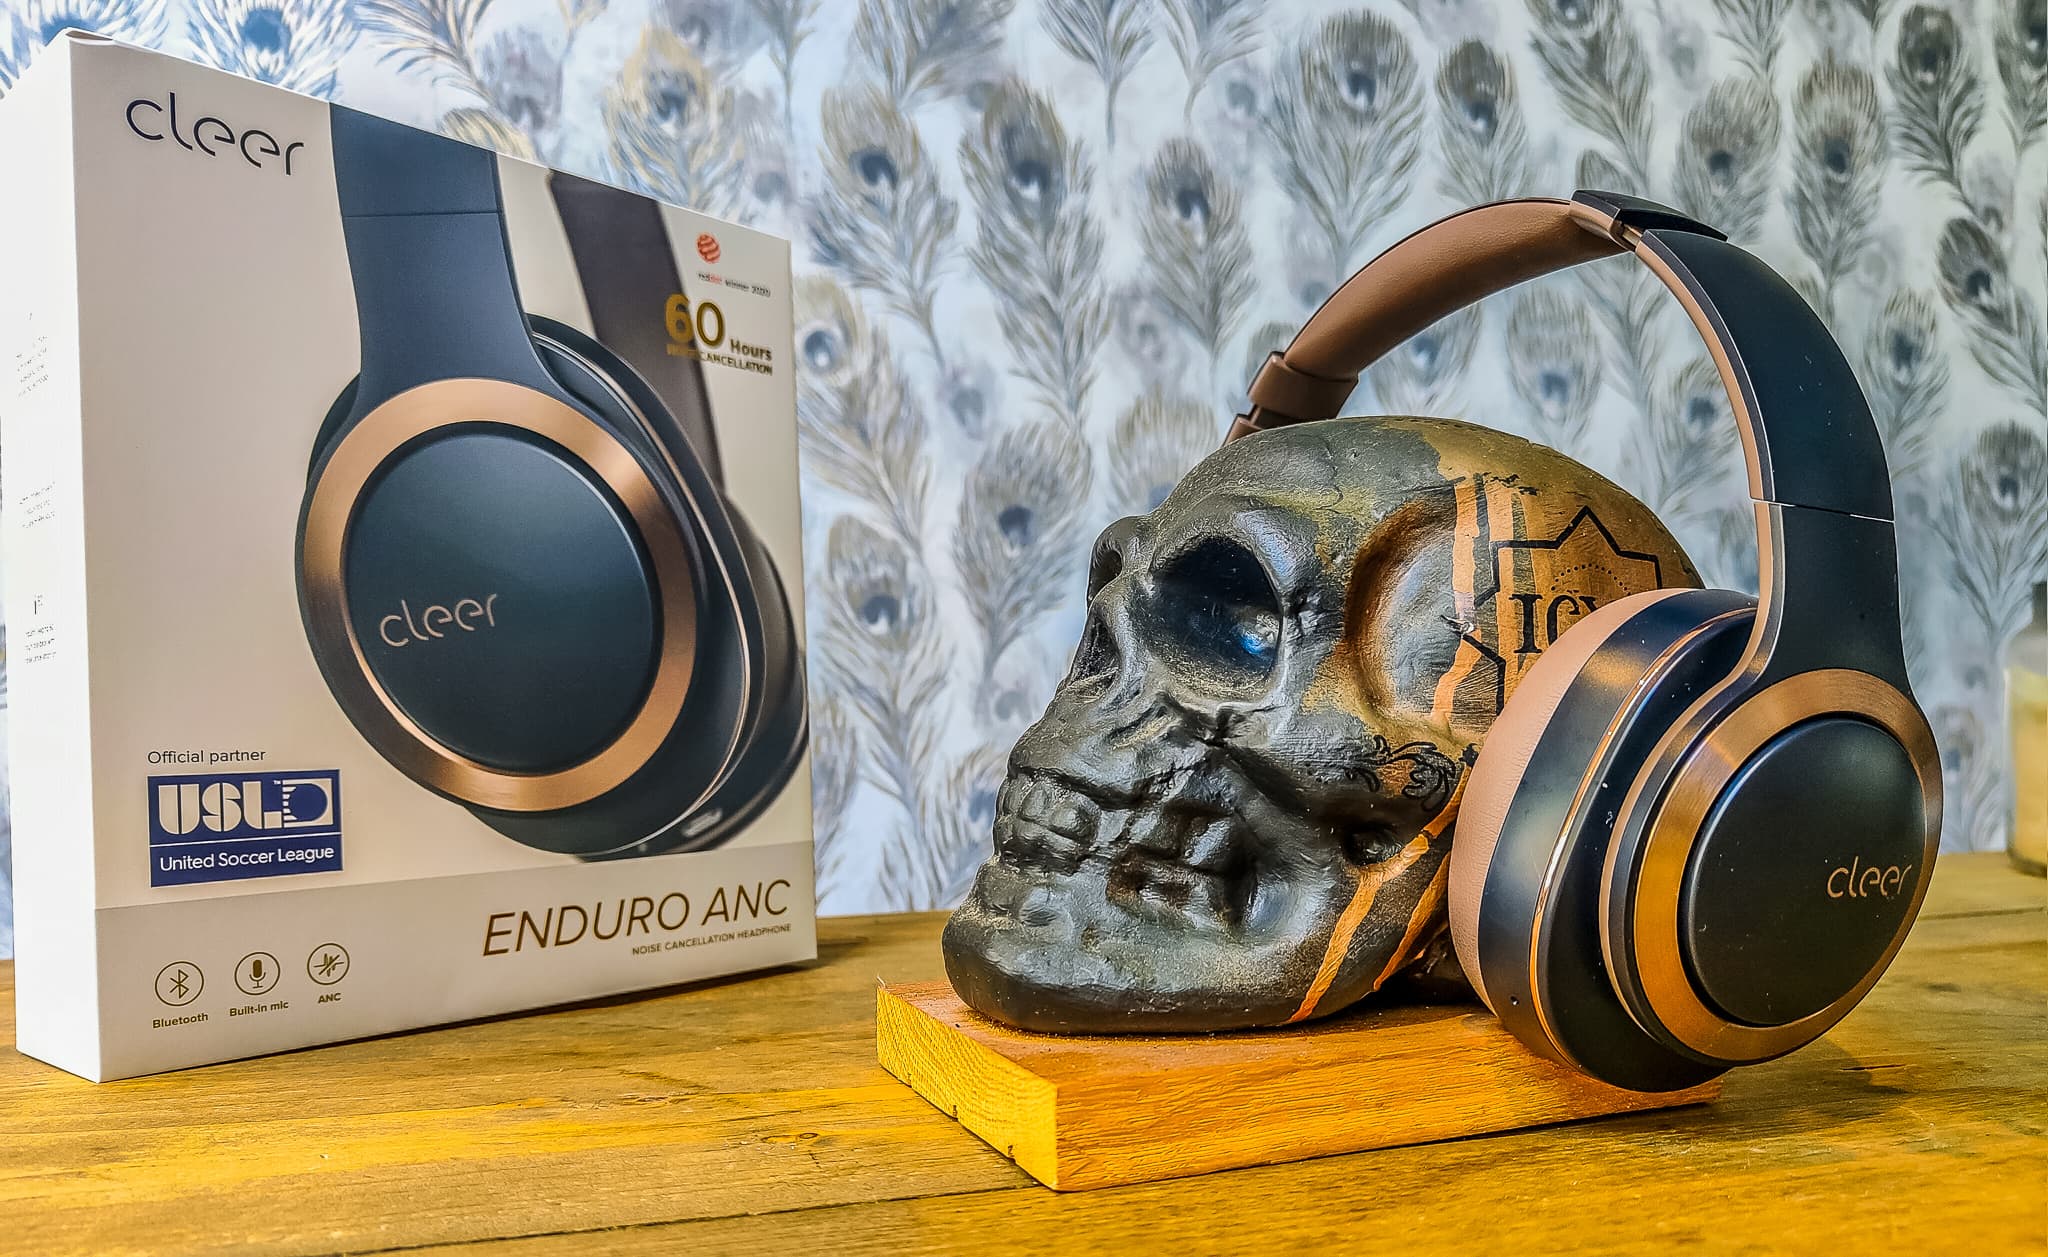 Cleer Enduro ANC Review – Affordable ANC headphones with superior sound vs Soundcore Life Q35, but ANC could be better